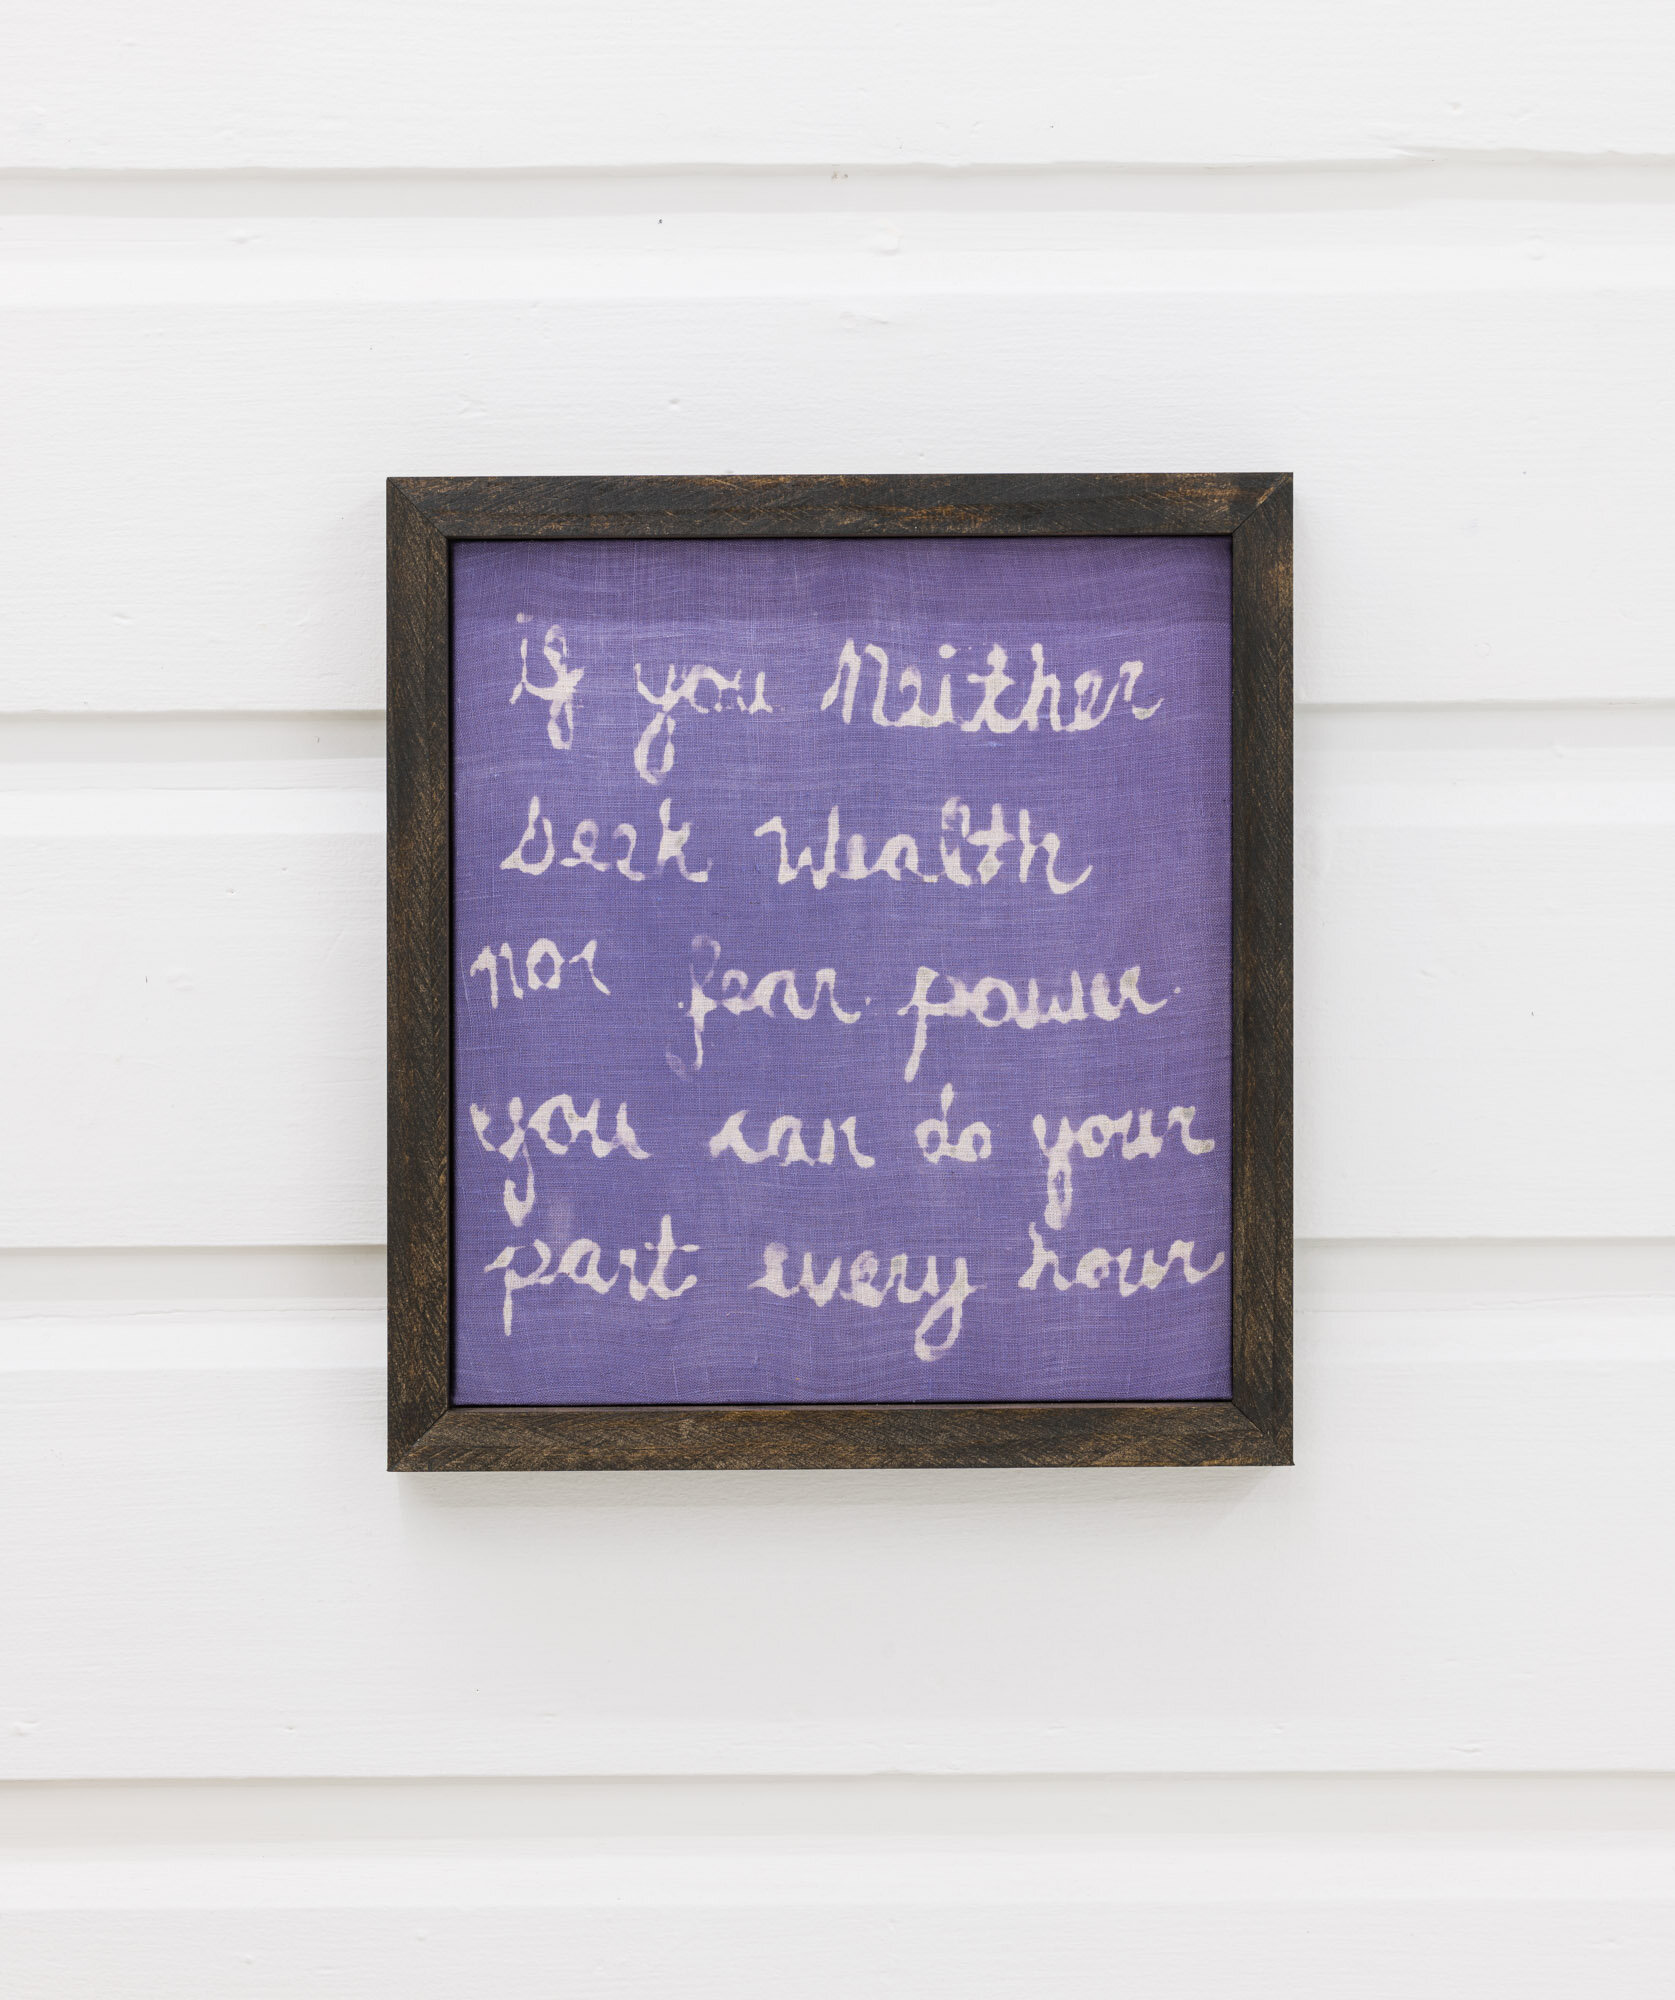  Kalaija Mallery,  Pious Gesture (if you neither seek wealth, nor fear power) ​, pigment-dyed linen, artist-made frame, 11”x12” 